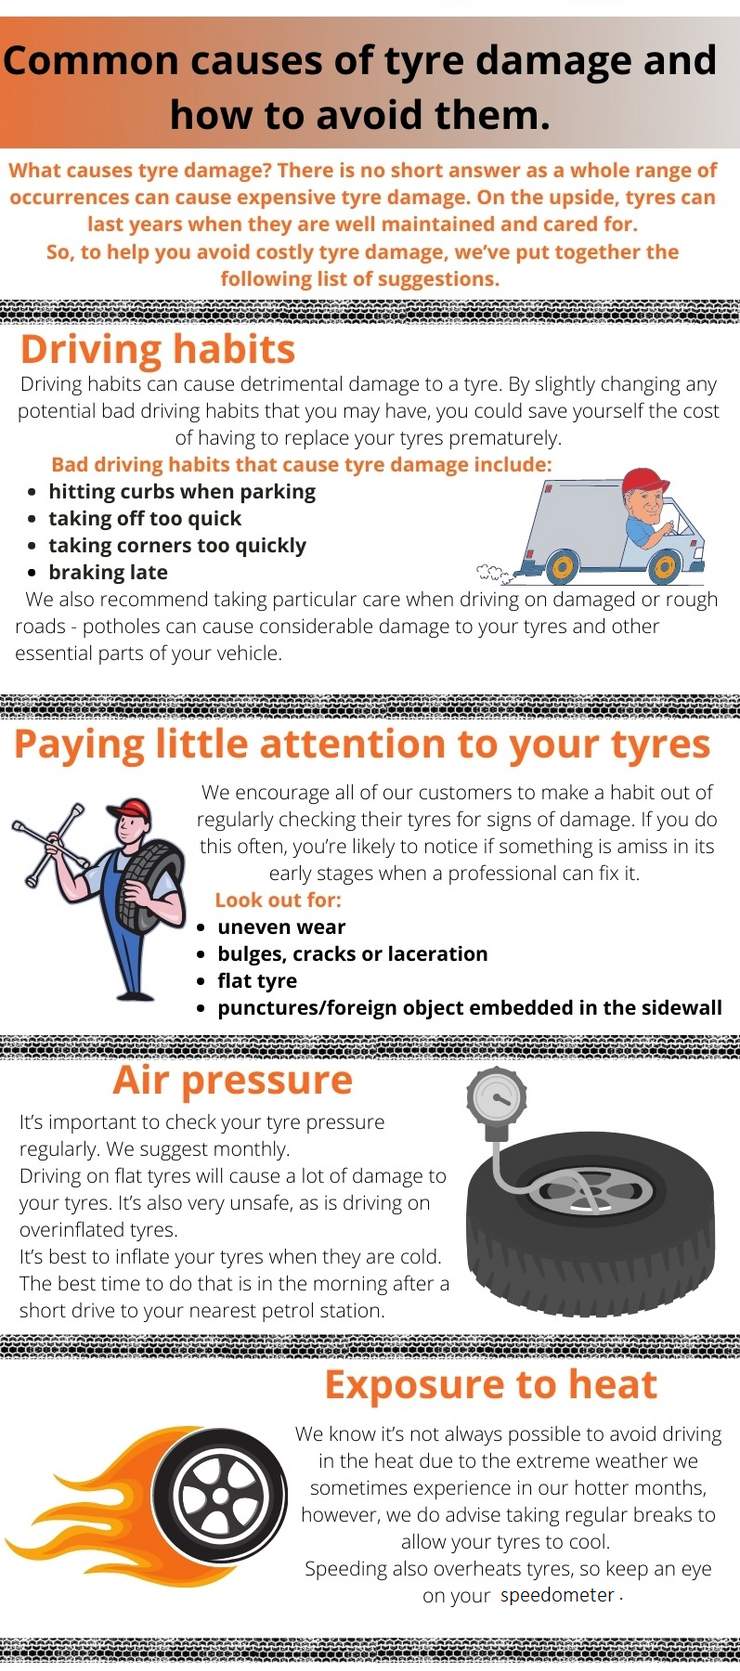 common causes of tyre damage and prevention